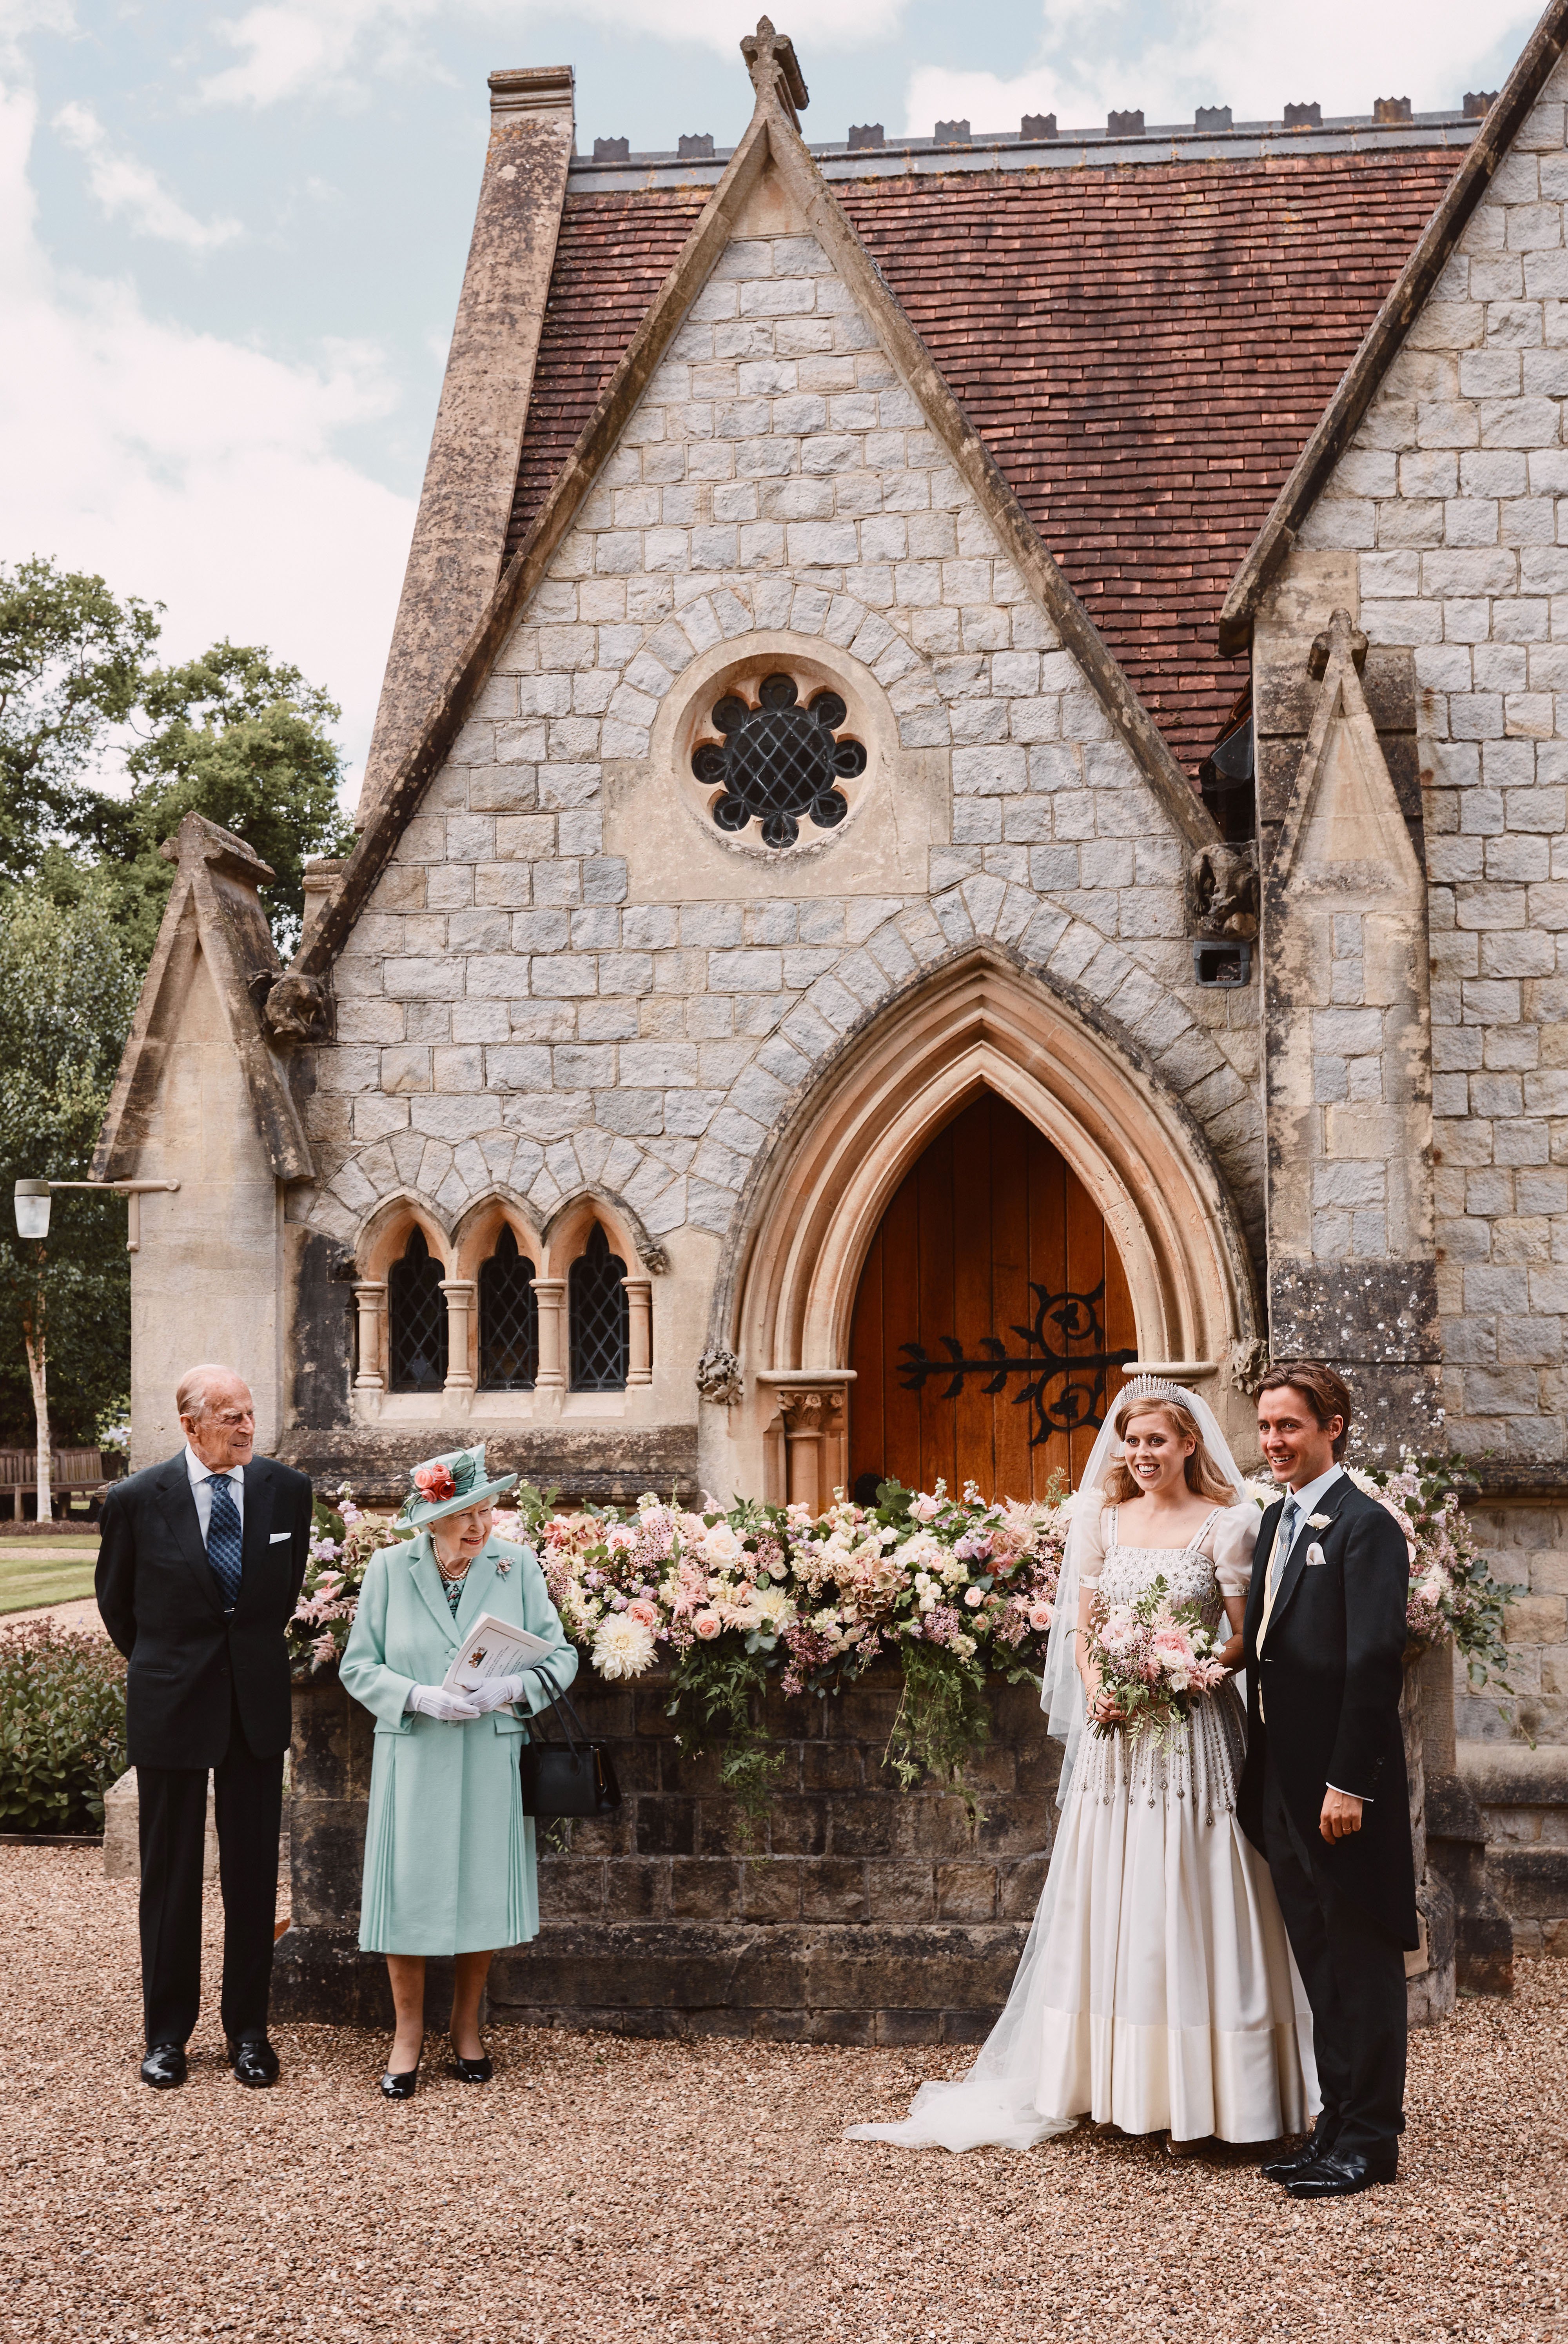 Princess Beatrice and Edoardo Mapelli Mozzi pictured outside The Royal Chapel of All Saints at Royal Lodge, Windsor after their wedding with Queen Elizabeth II and Prince Philip on July 17, 2020 in Windsor, England. / Source: Getty Images